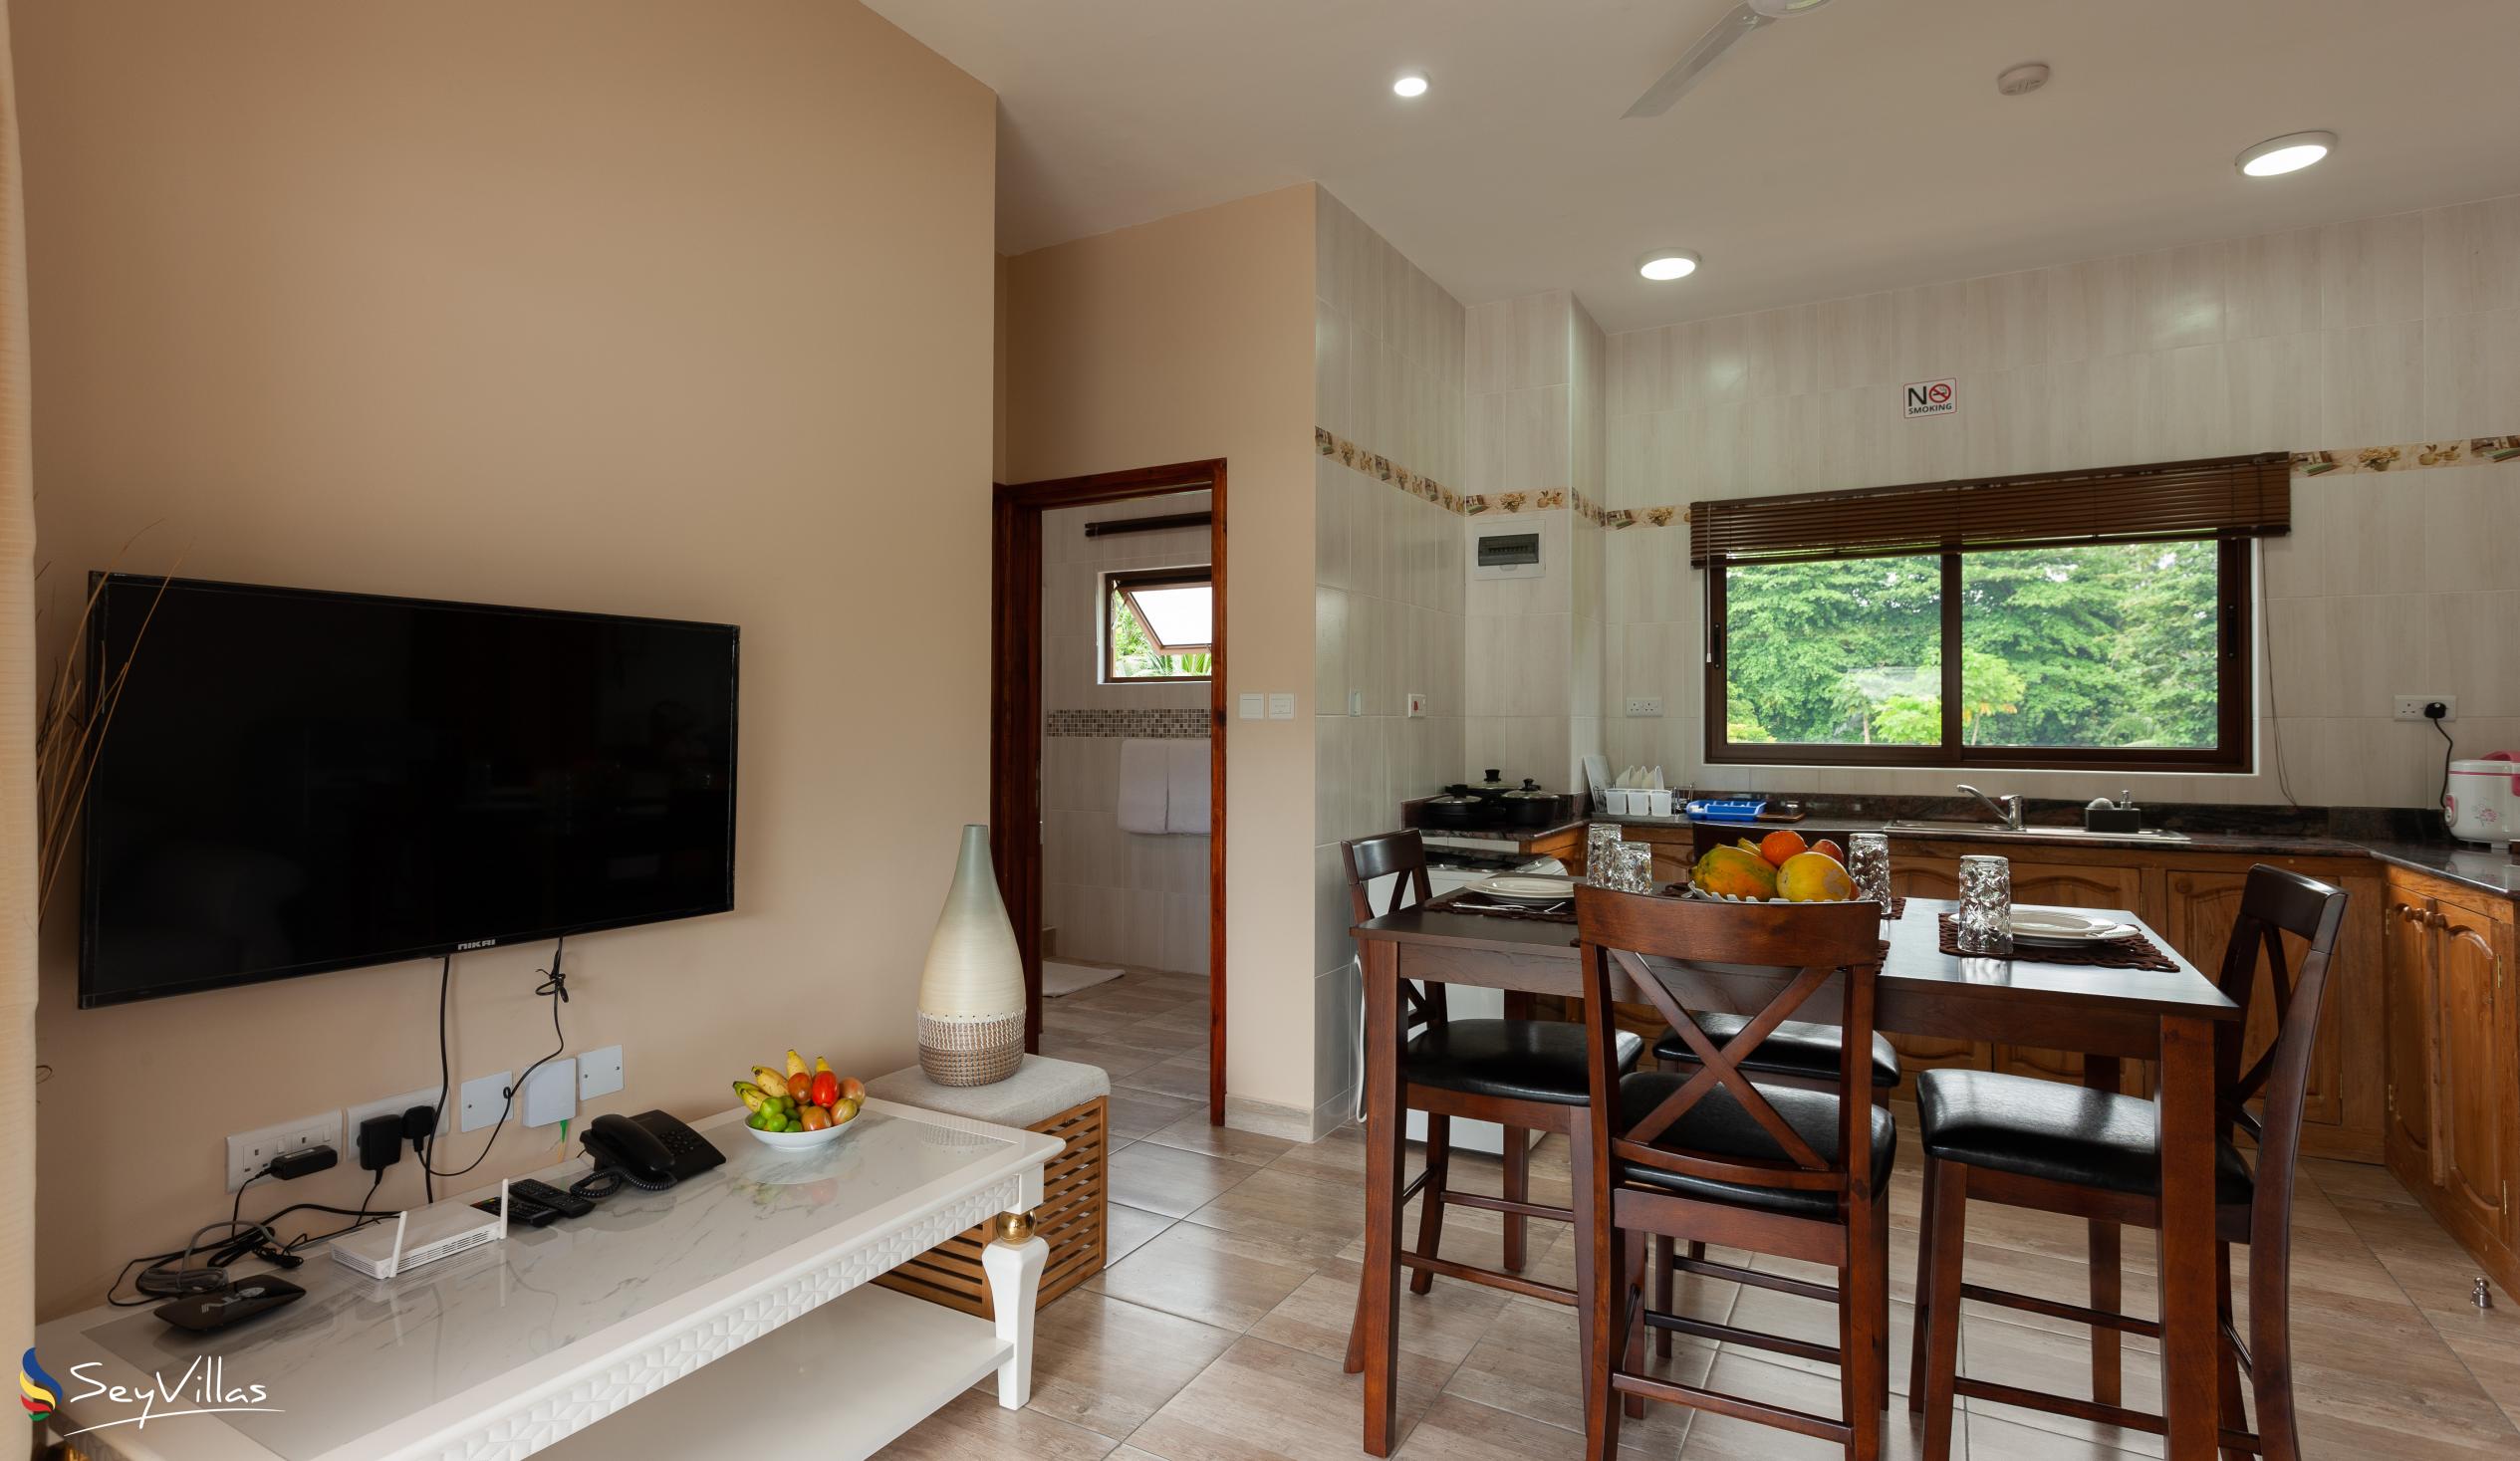 Foto 29: Stone Self Catering Apartments - Appartement 1 chambre - Praslin (Seychelles)